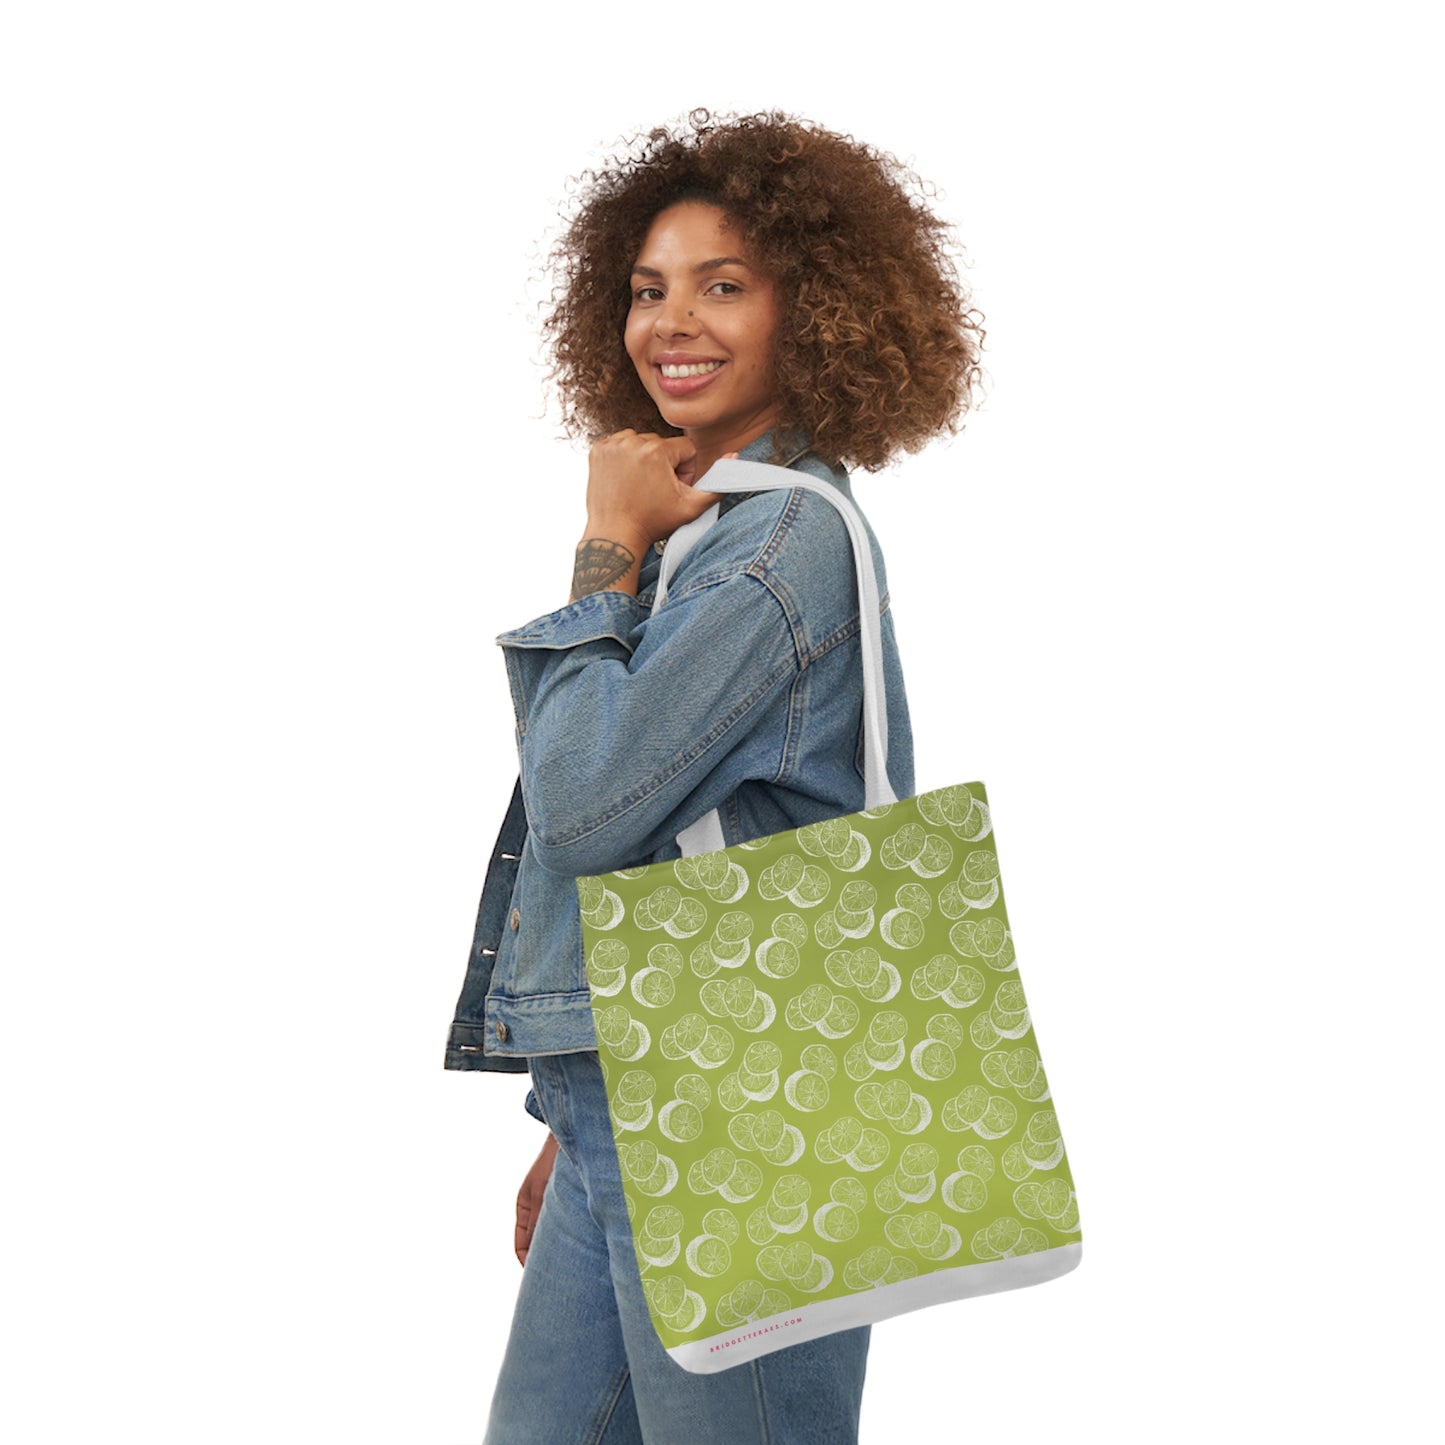 Juicy Limes Polyester Canvas Tote Bag